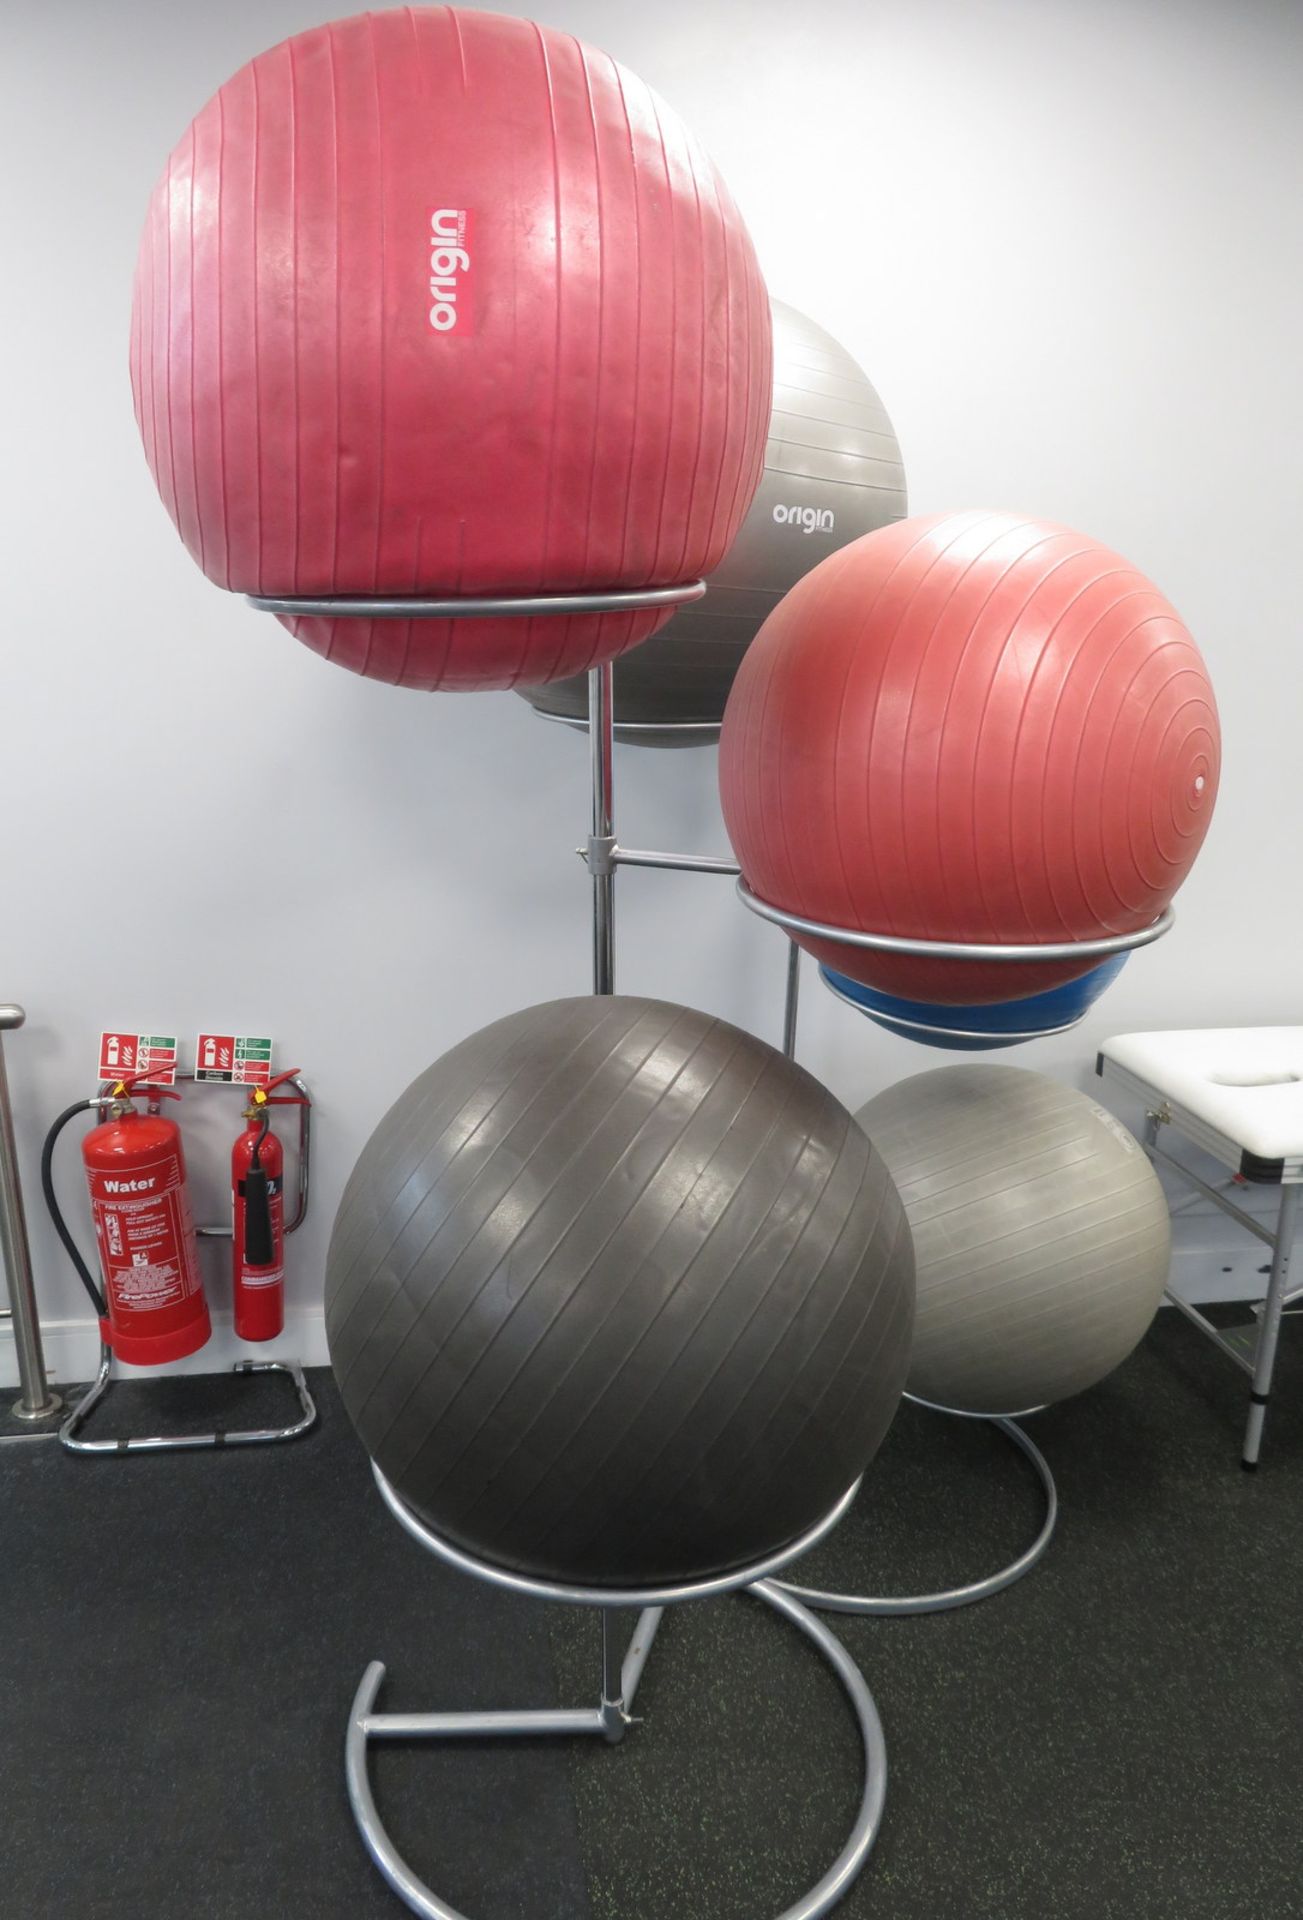 6x Pilates/Yoga Exercise Balls With 2 Stands - Various Sizes. - Image 6 of 6